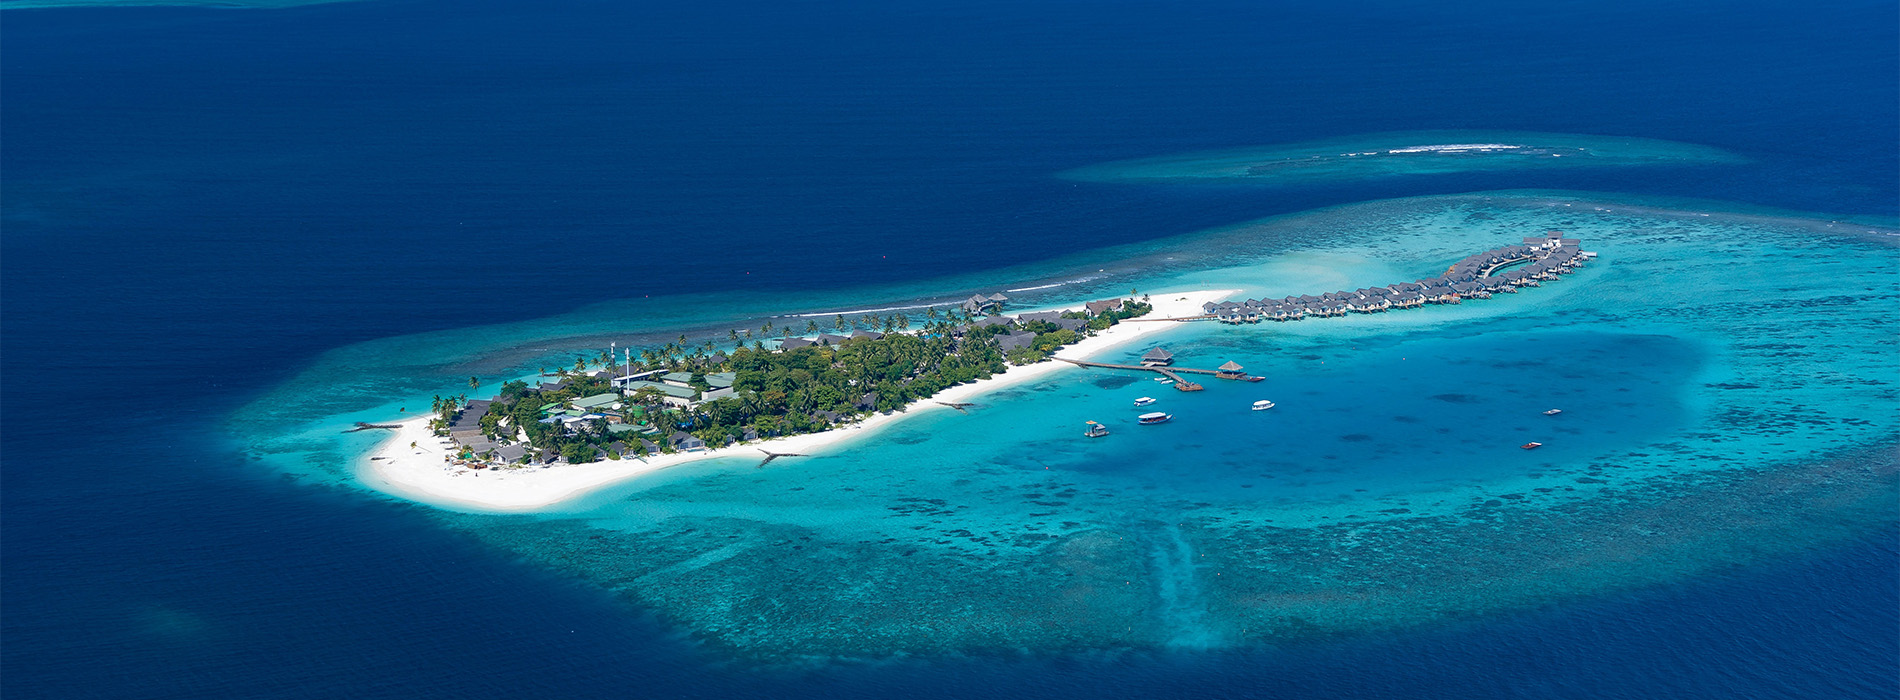 Enjoy a slower pace of life at smaller resorts in the Maldives